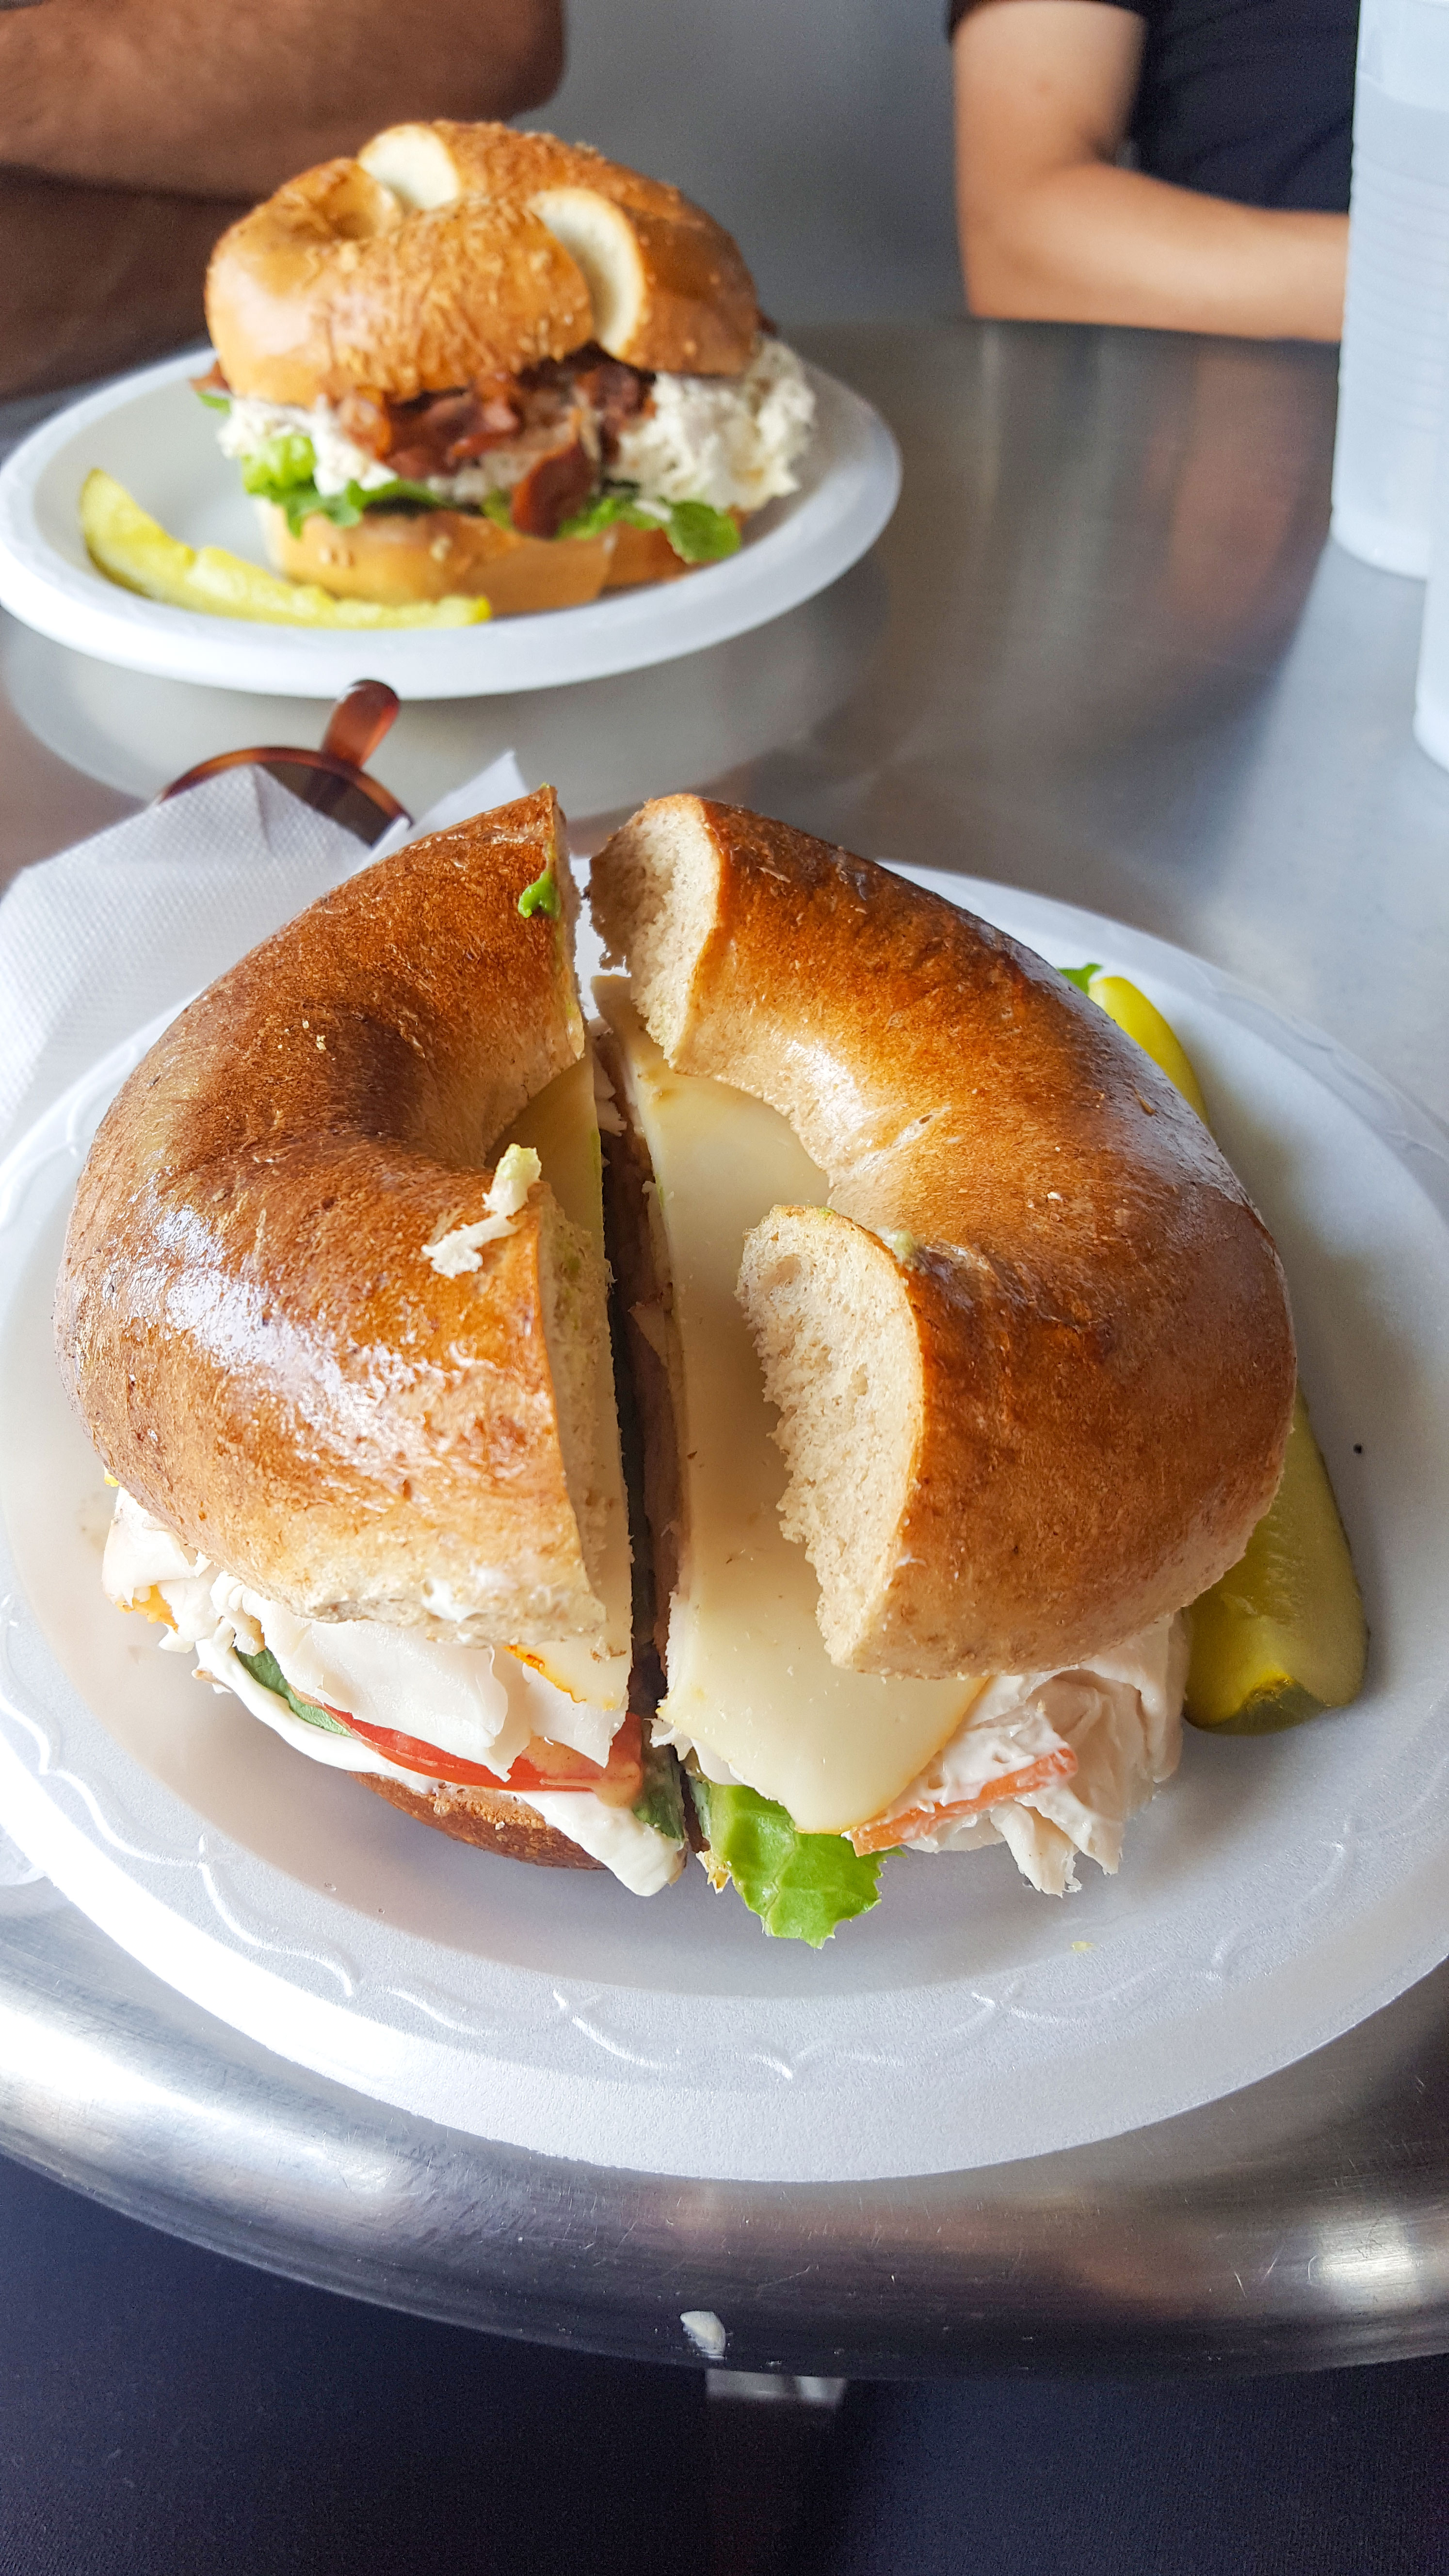 Two plates with bagel sandwiches